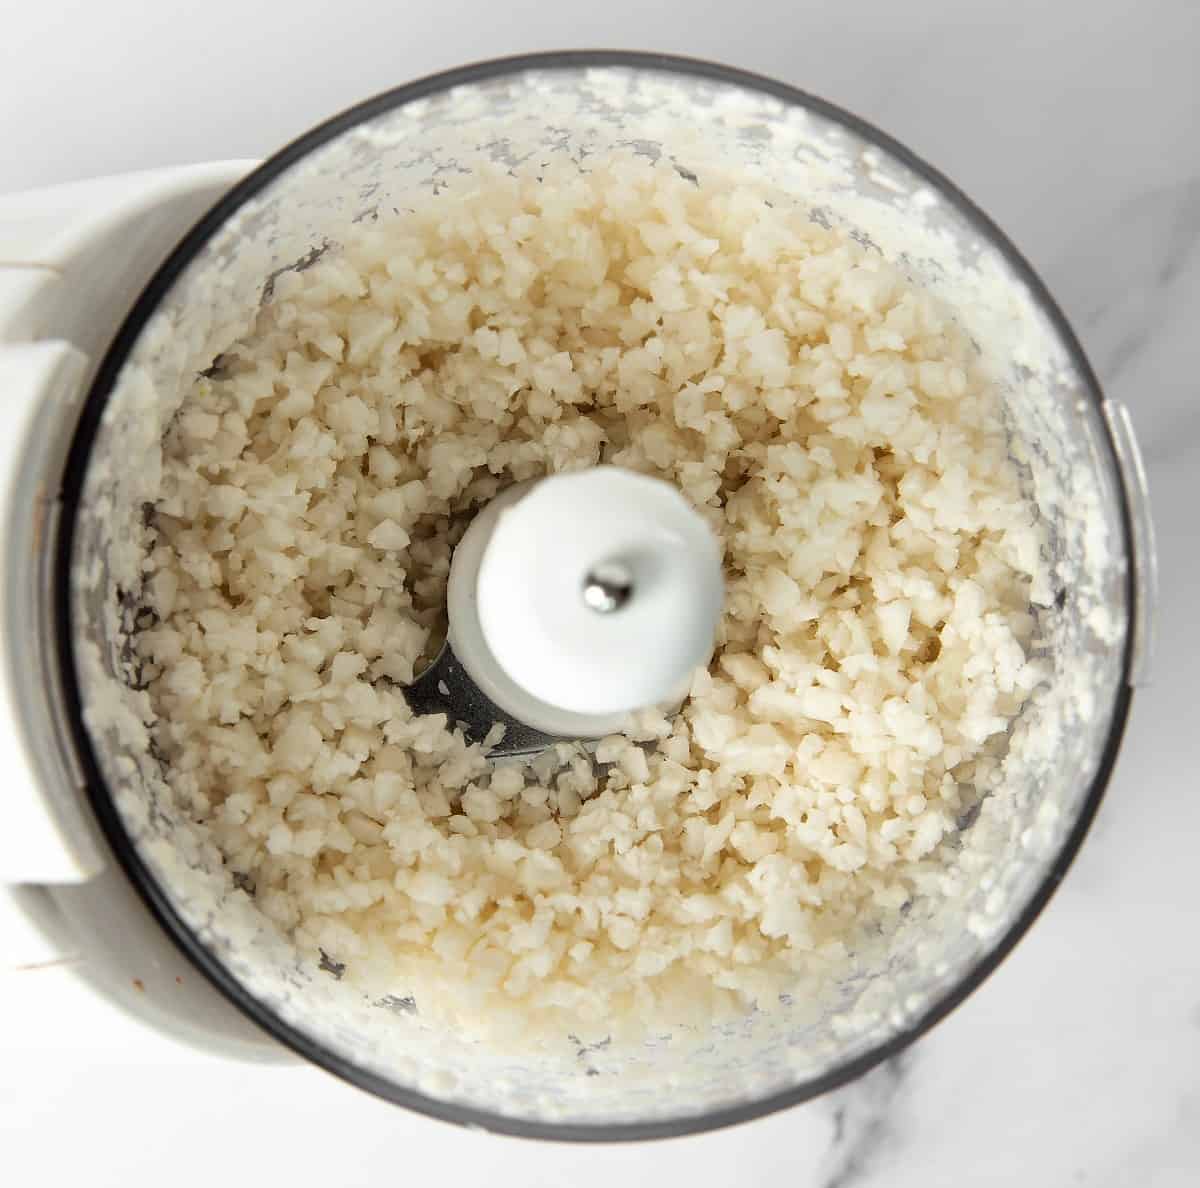 Looking down into a food processor after the cauliflower has been processed into rice.